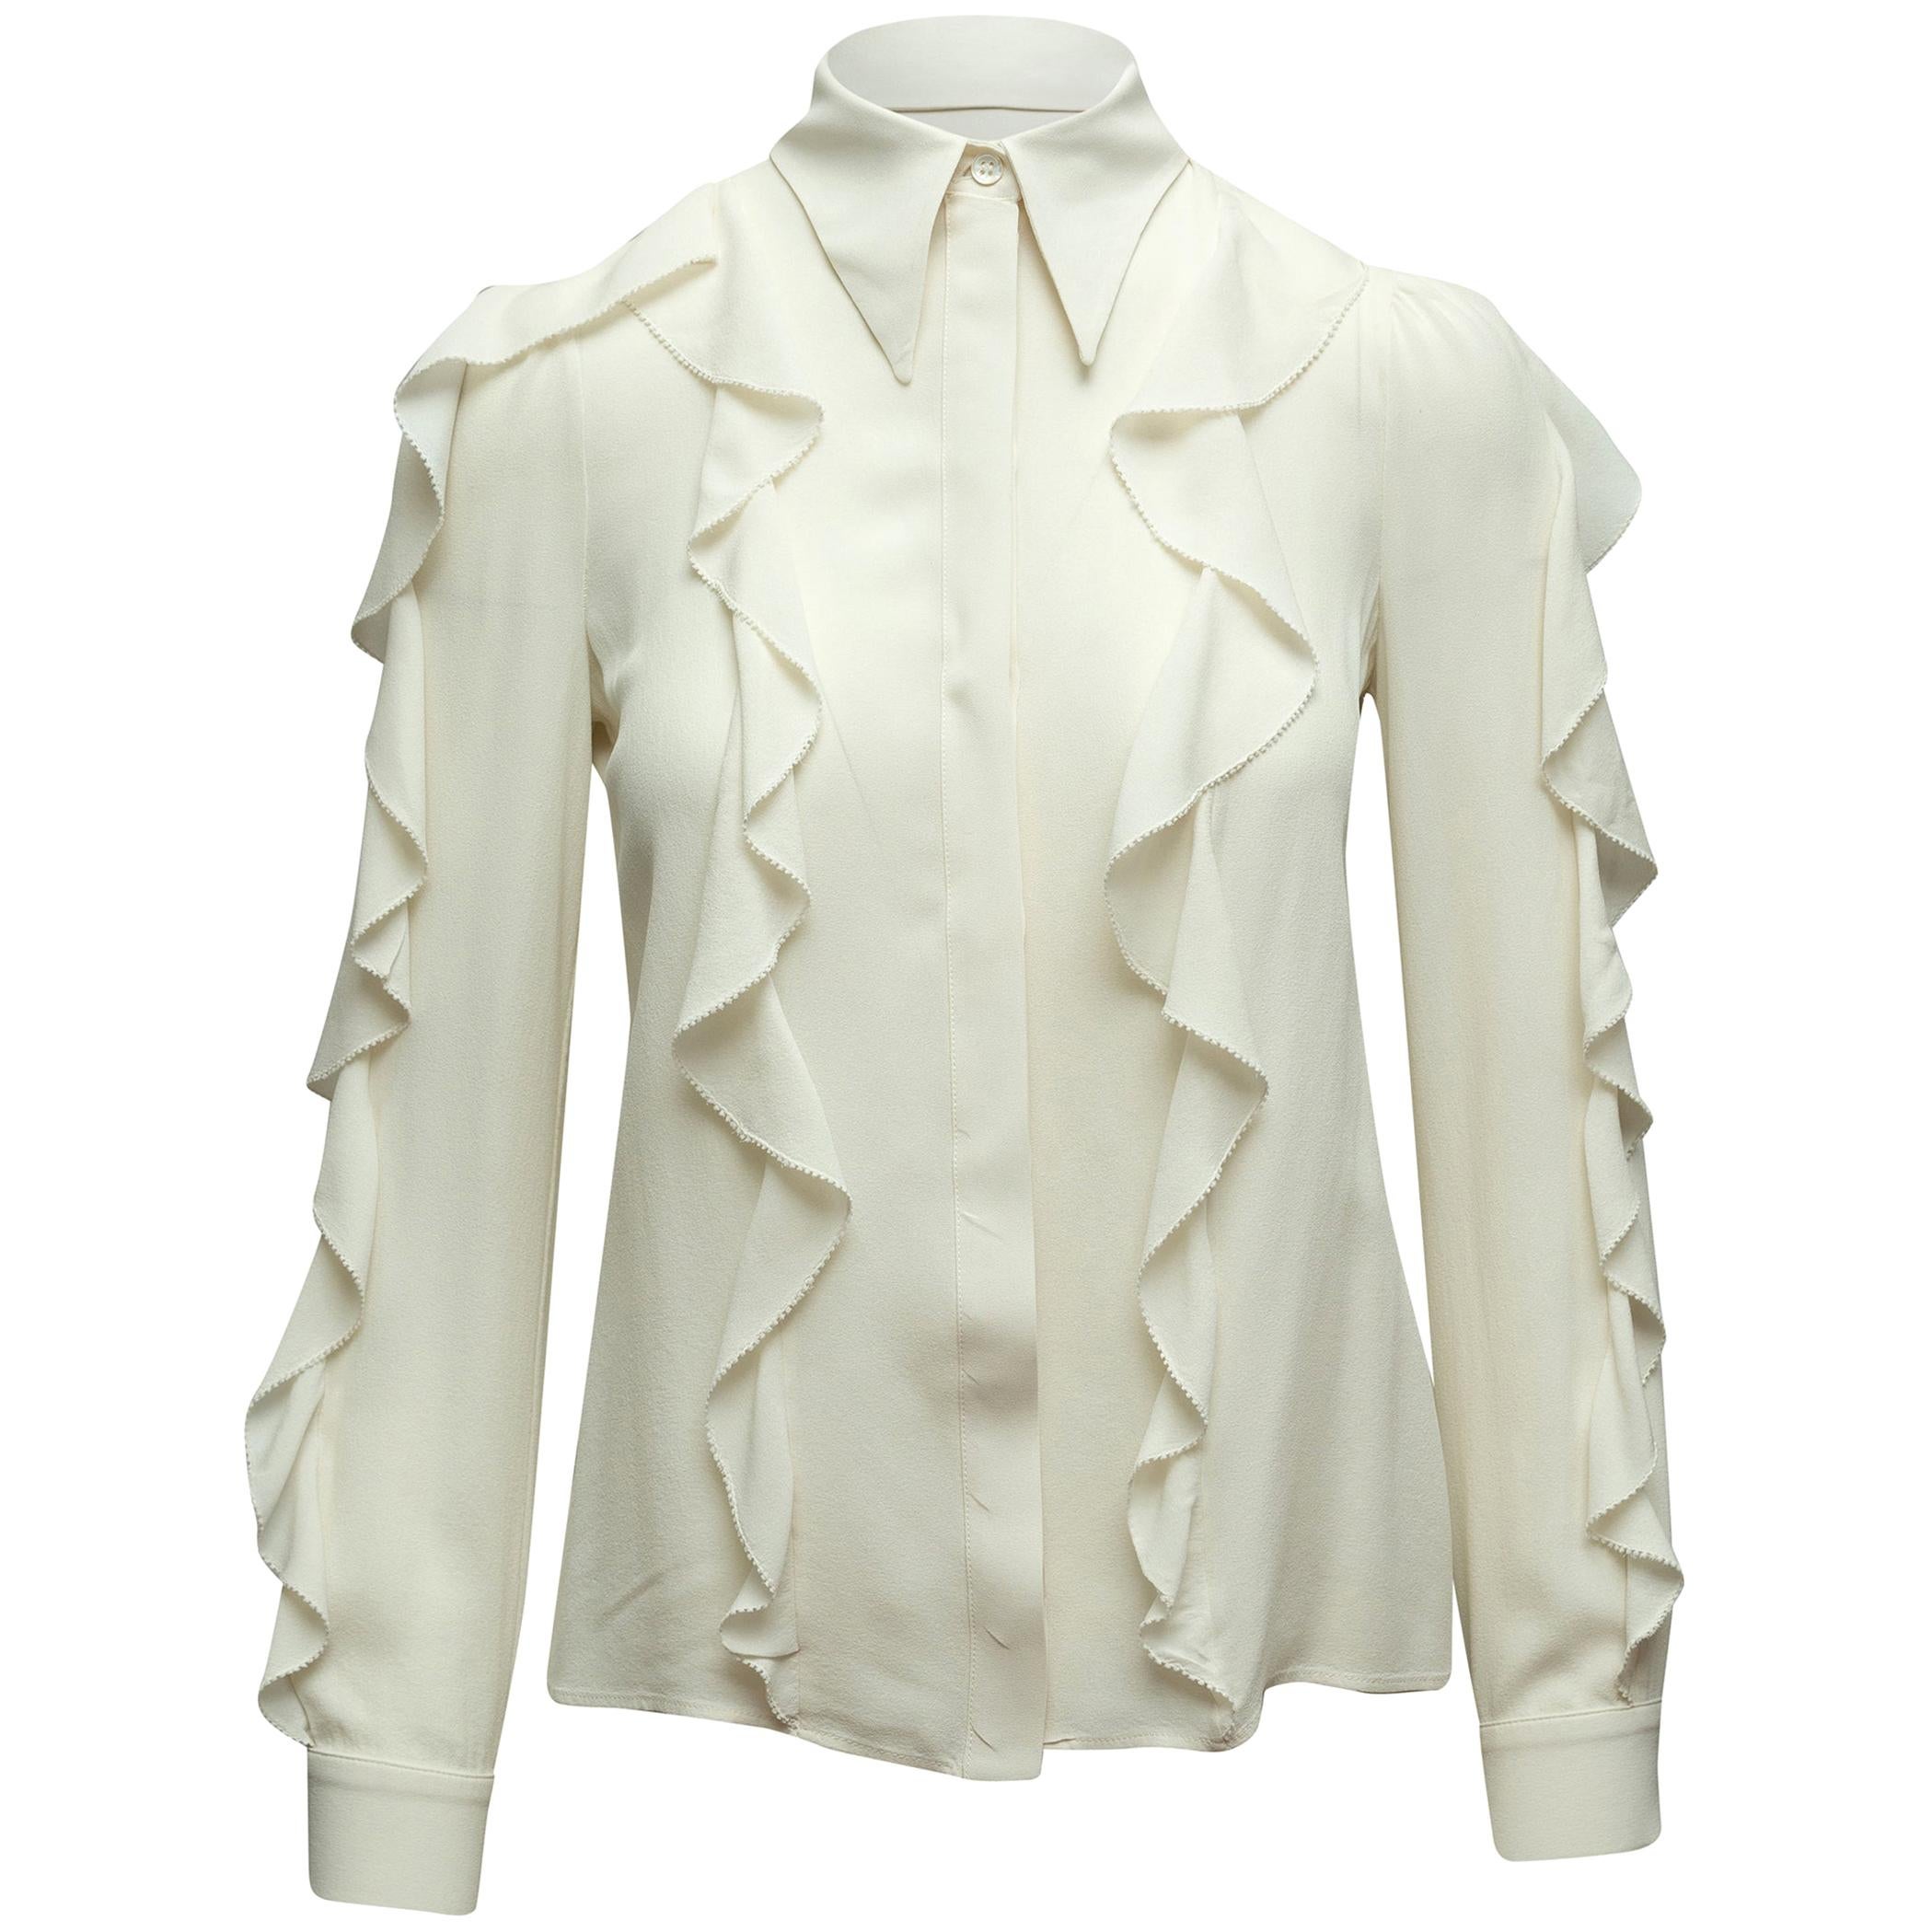 Michael Kors Ivory Collection Ruffle-Trimmed Top